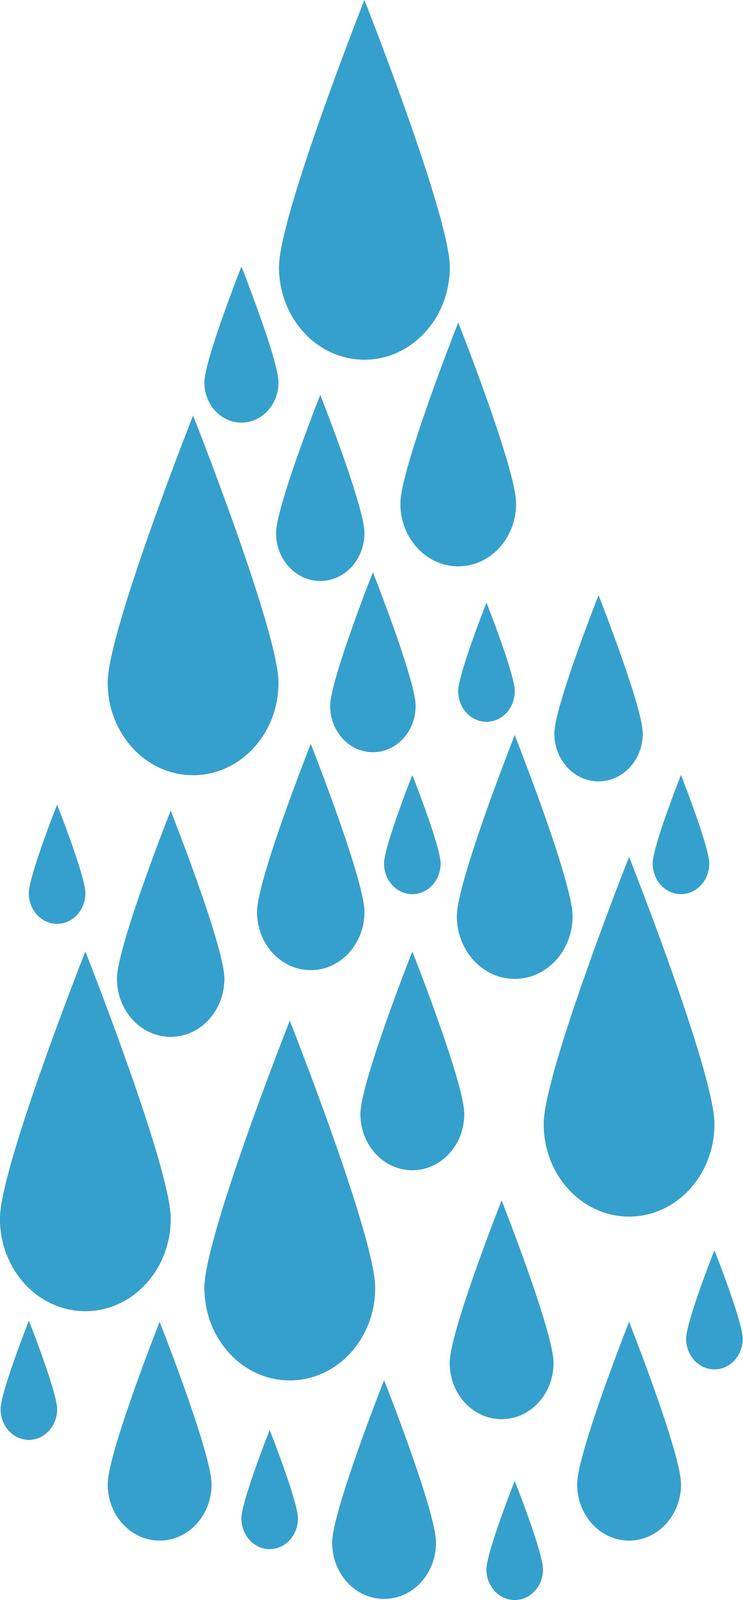 Water droplet icon composed of a collection of water droplets. Editable vector.